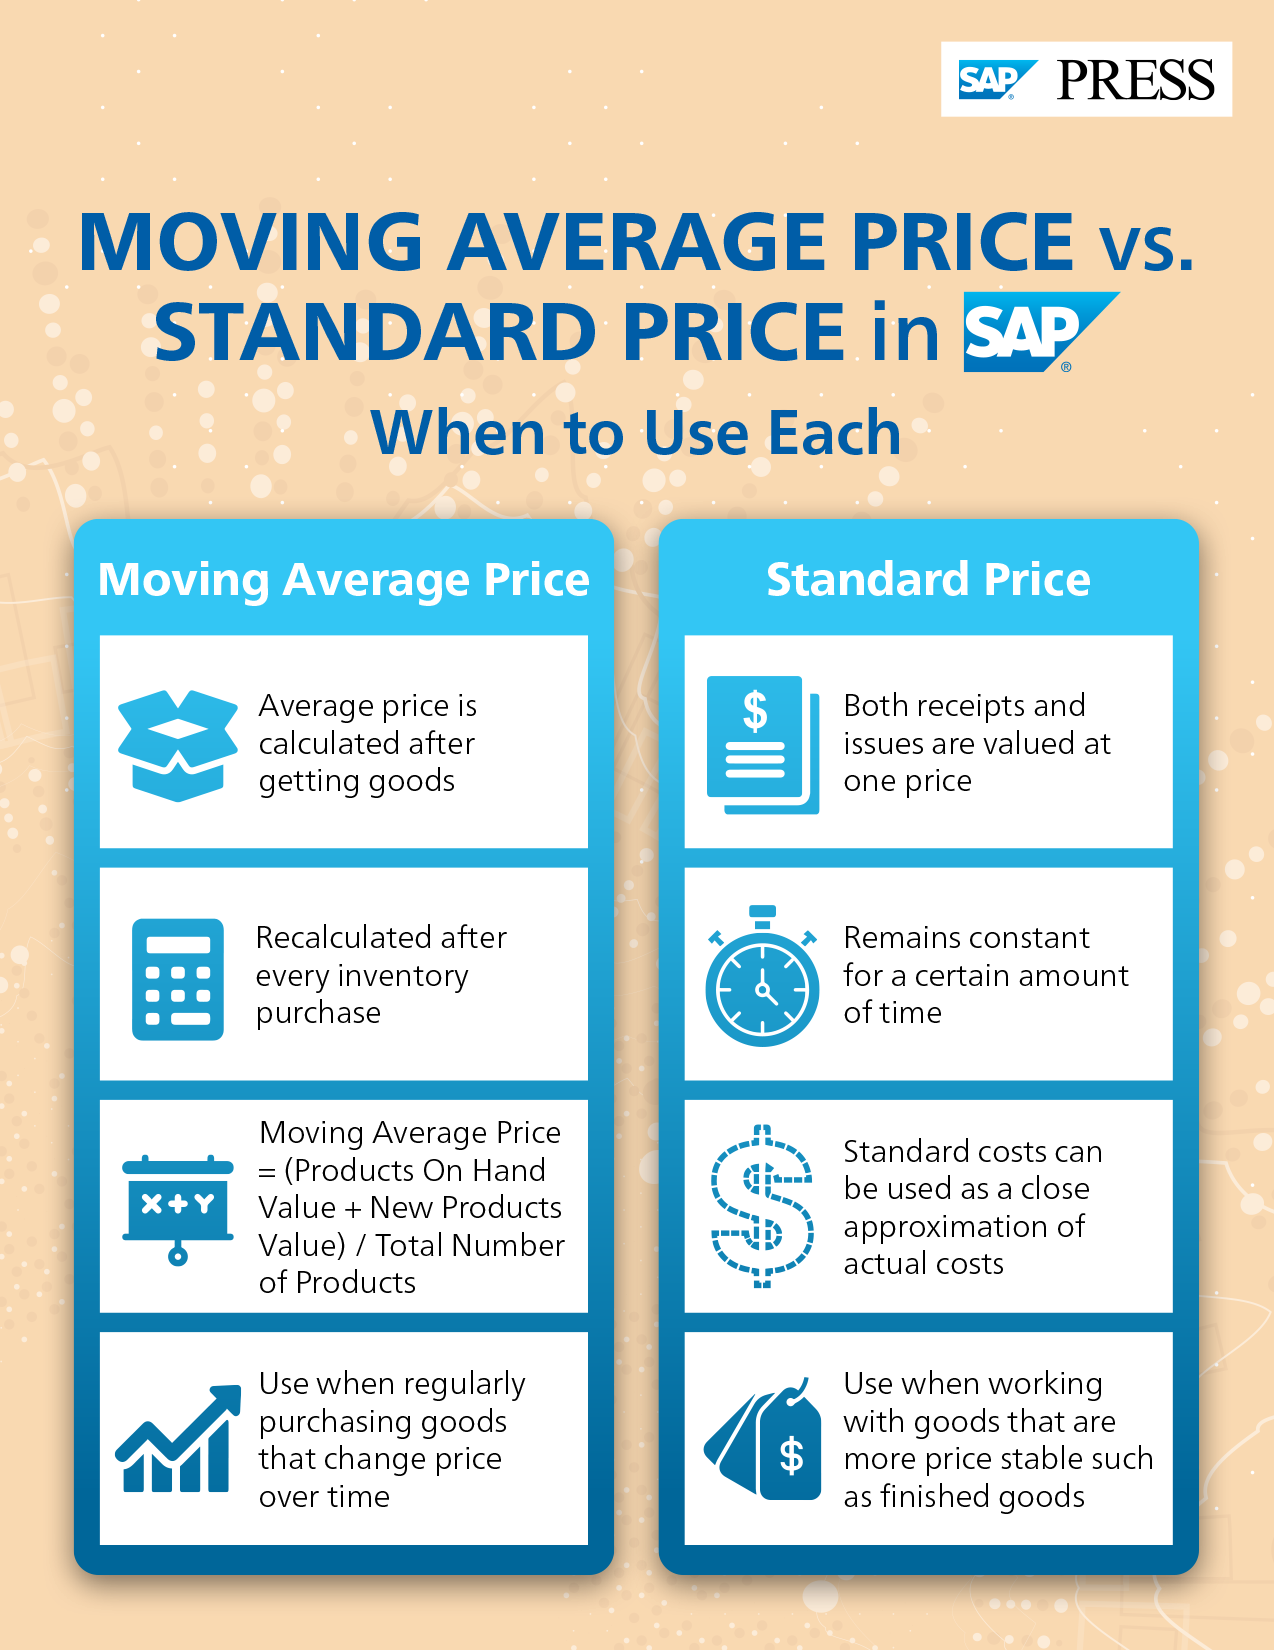 What Is the Difference Between Moving Average Price and Standard Price in SAP?